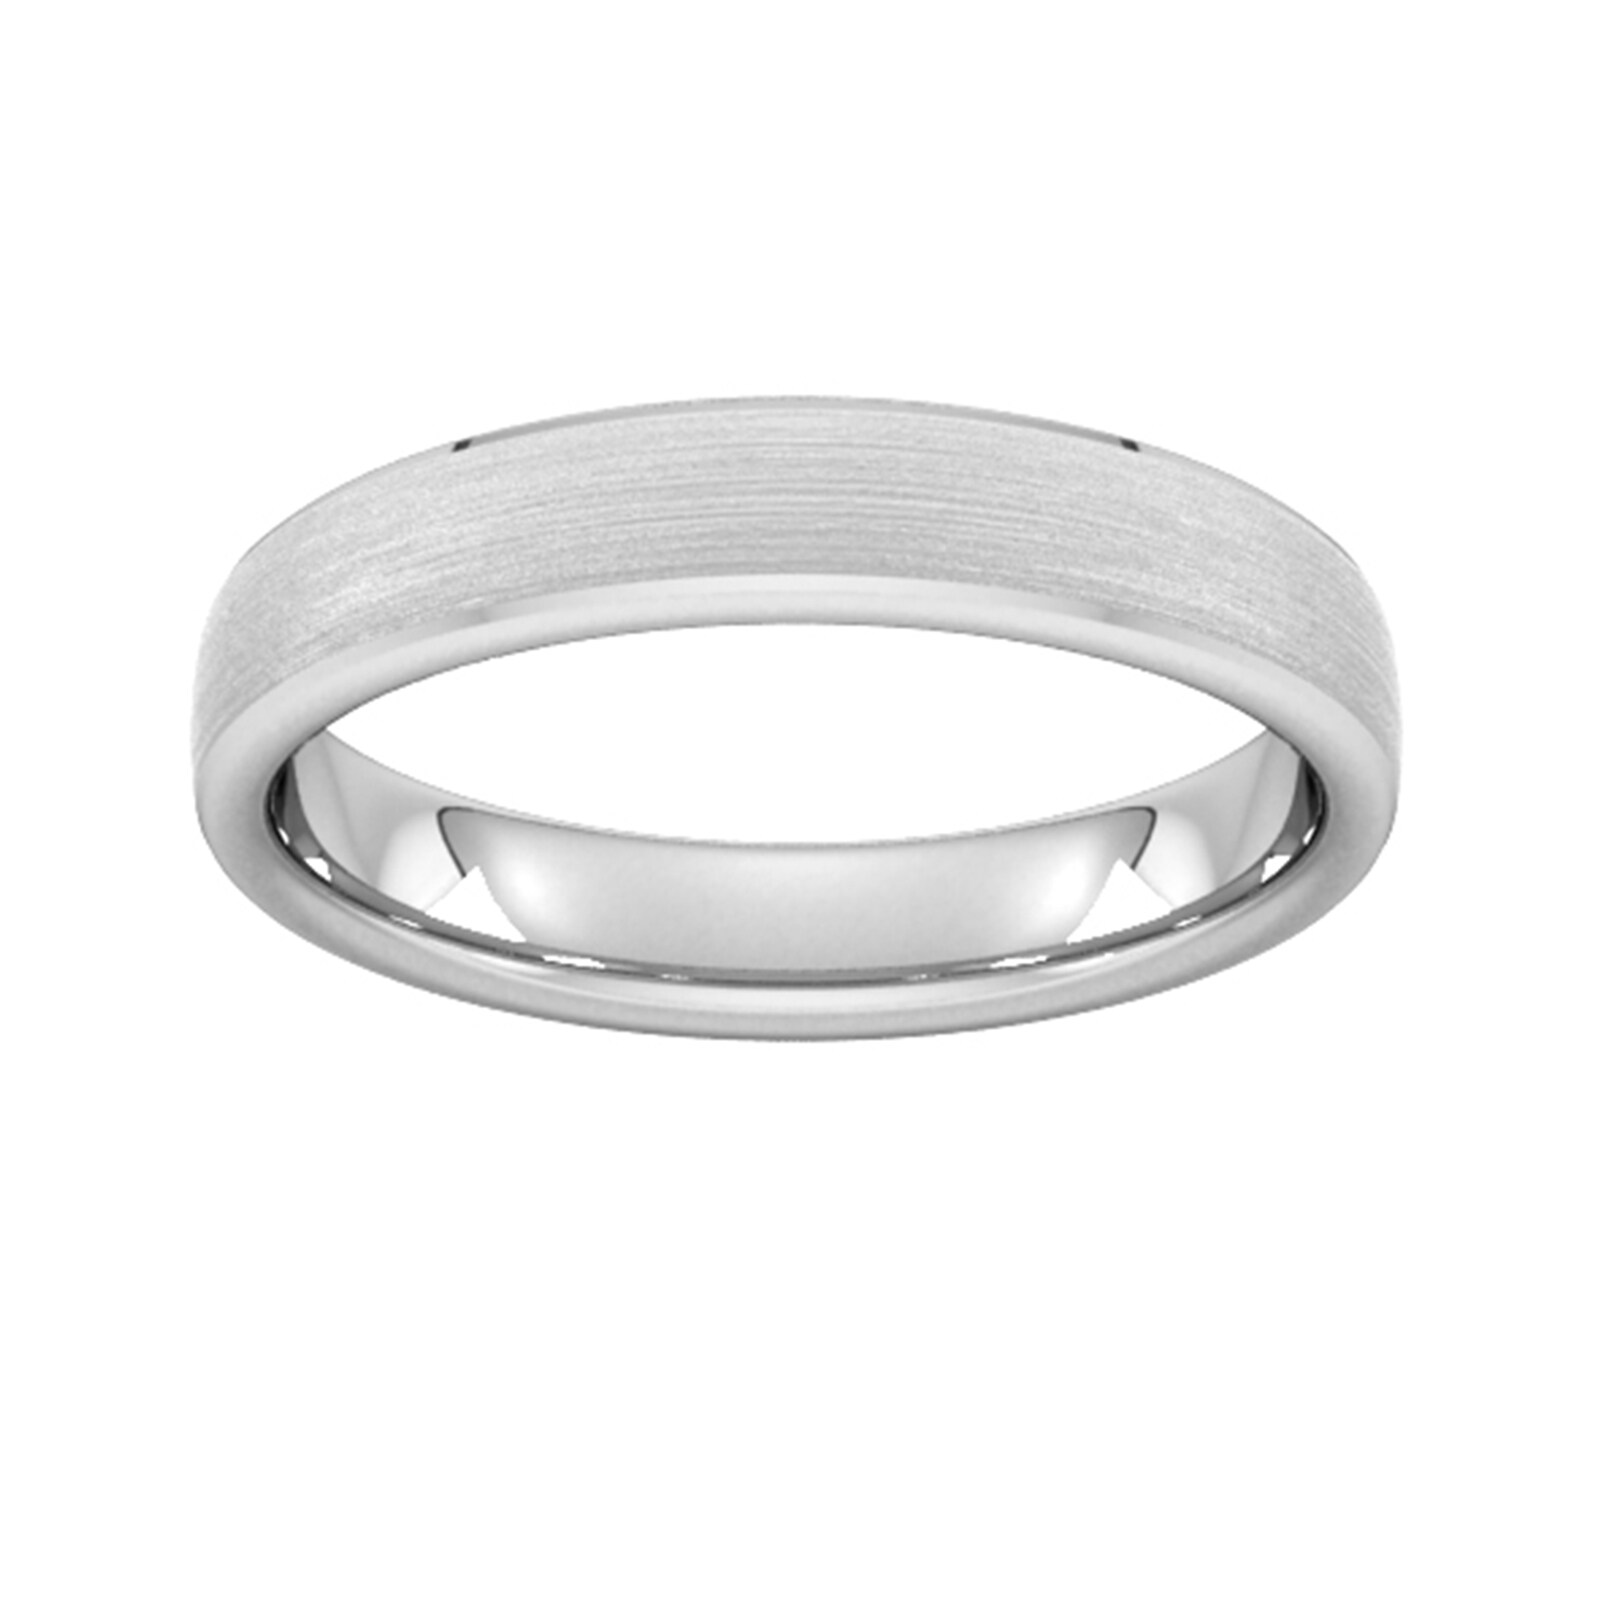 4mm Slight Court Extra Heavy Polished Chamfered Edges With Matt Centre Wedding Ring In 9 Carat White Gold - Ring Size Q